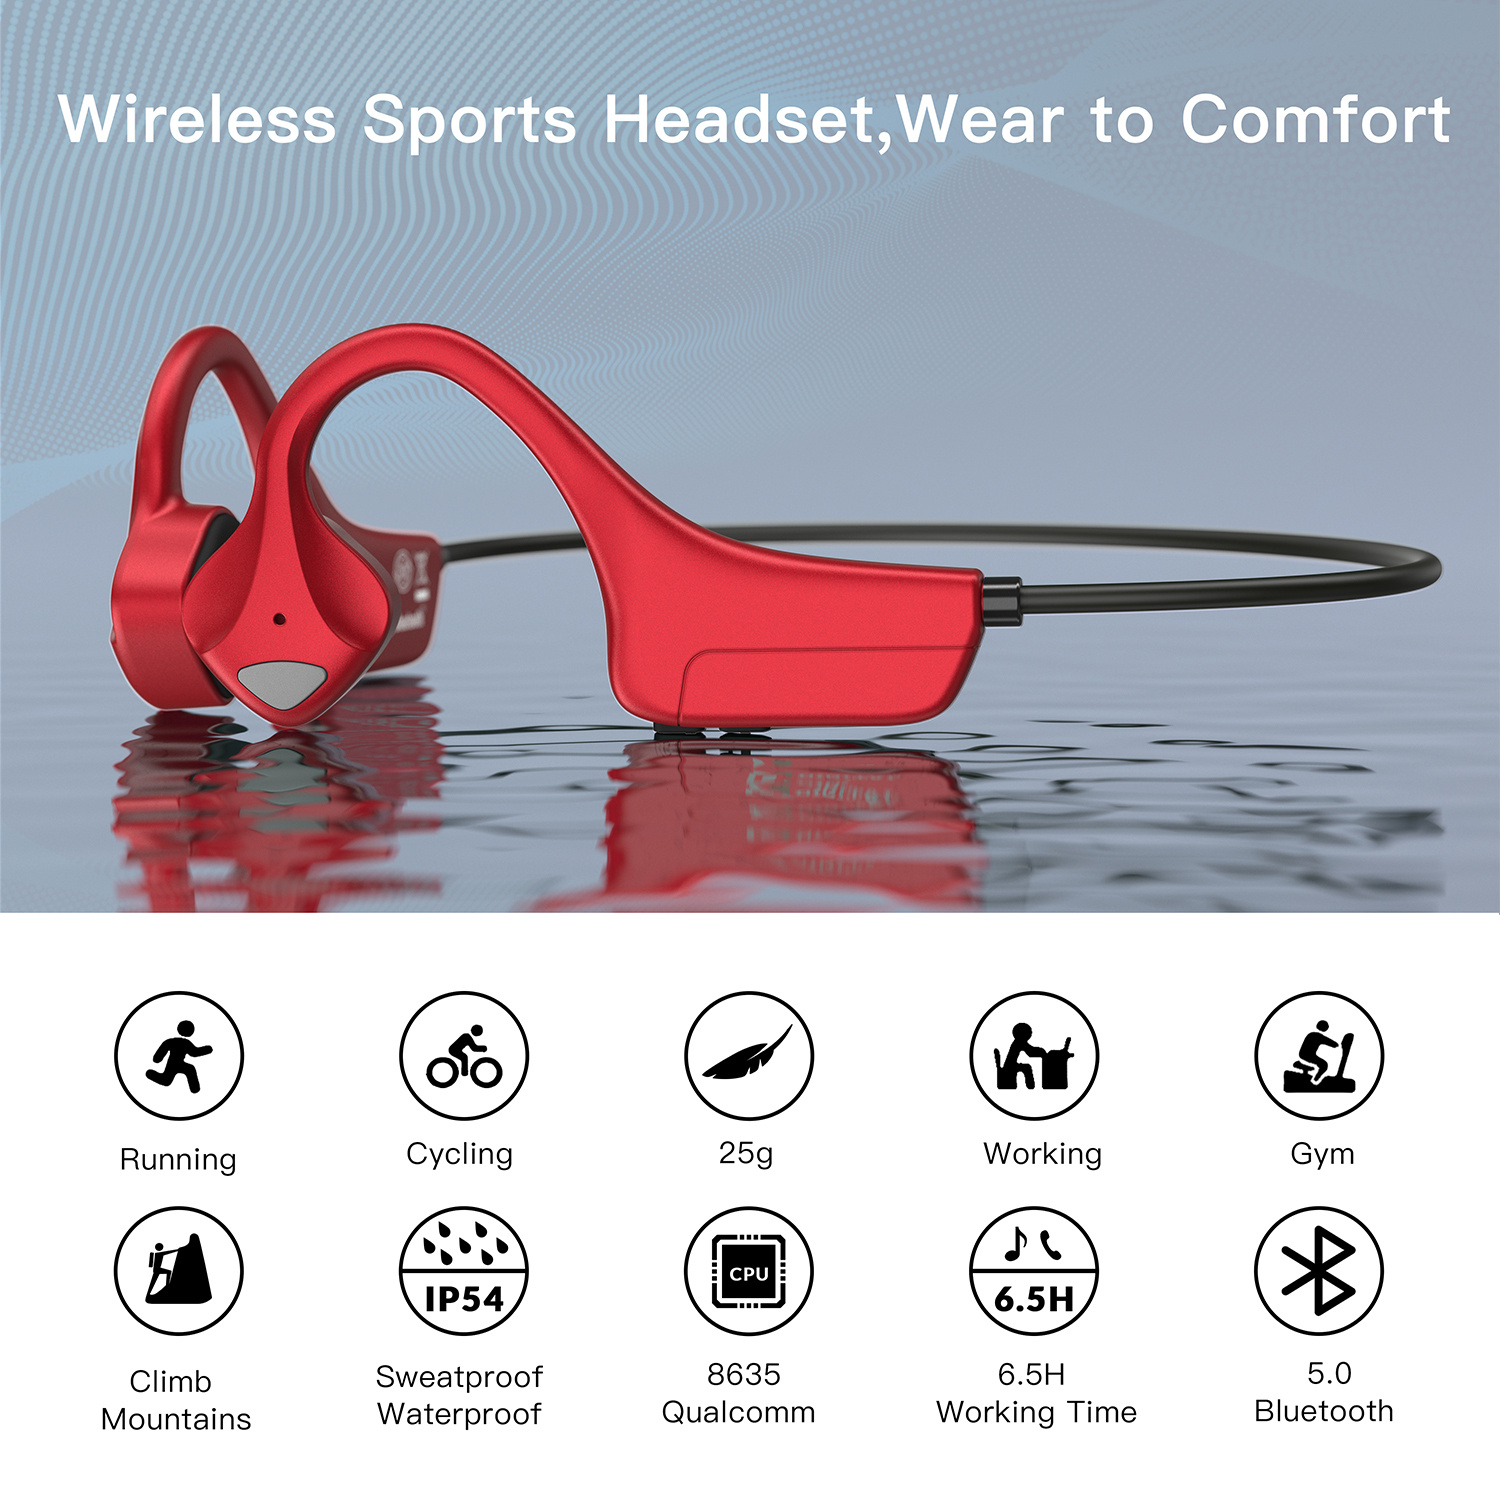 Bone Conduction Headphones with Noise Reduction Tech, 9 Digital N1 Open Ear Headphones with MIC, Waterproof Wireless Bluetooth 5.0 Sport Headset for Running, Bicycling, Hiking, Yoga -Red